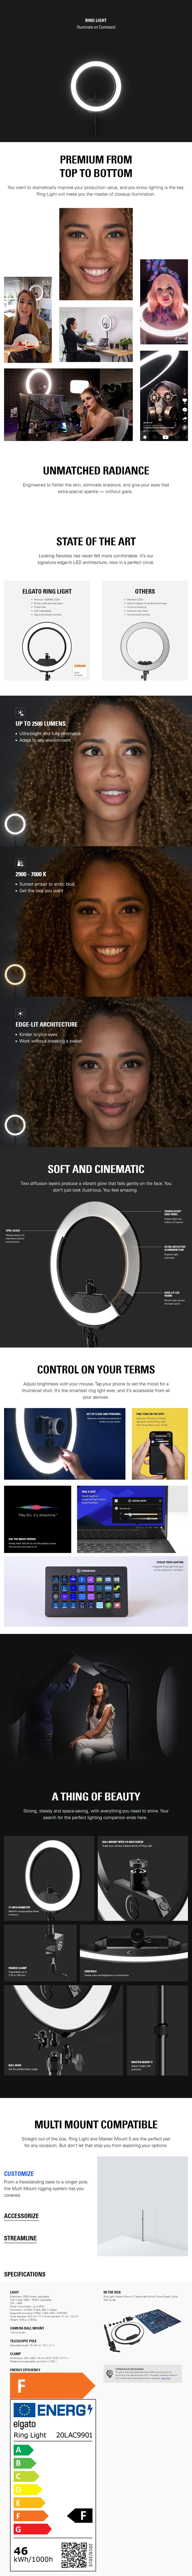 A large marketing image providing additional information about the product Elgato Ring Light - Additional alt info not provided